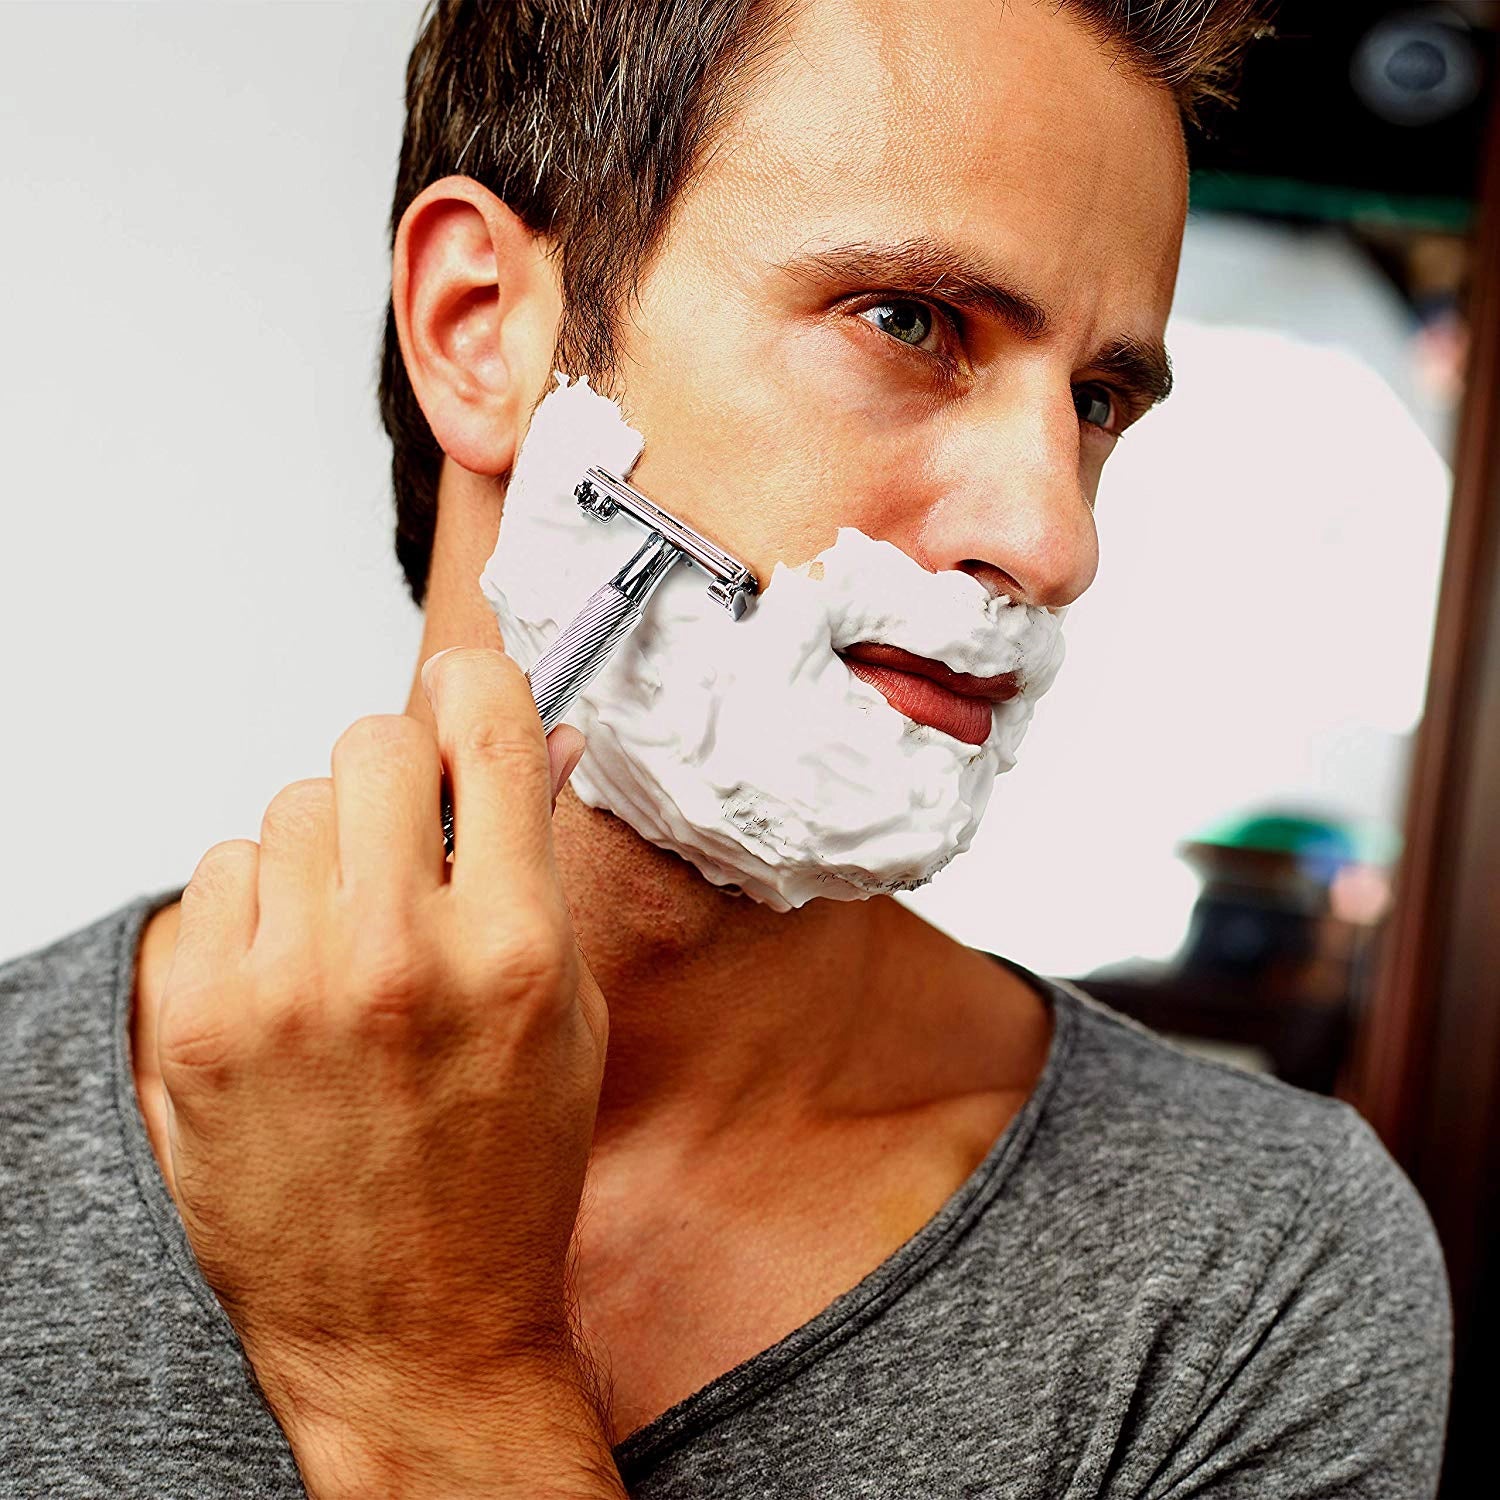 Electric Shaver vs Razor: Which Is Better For Facial Hair?